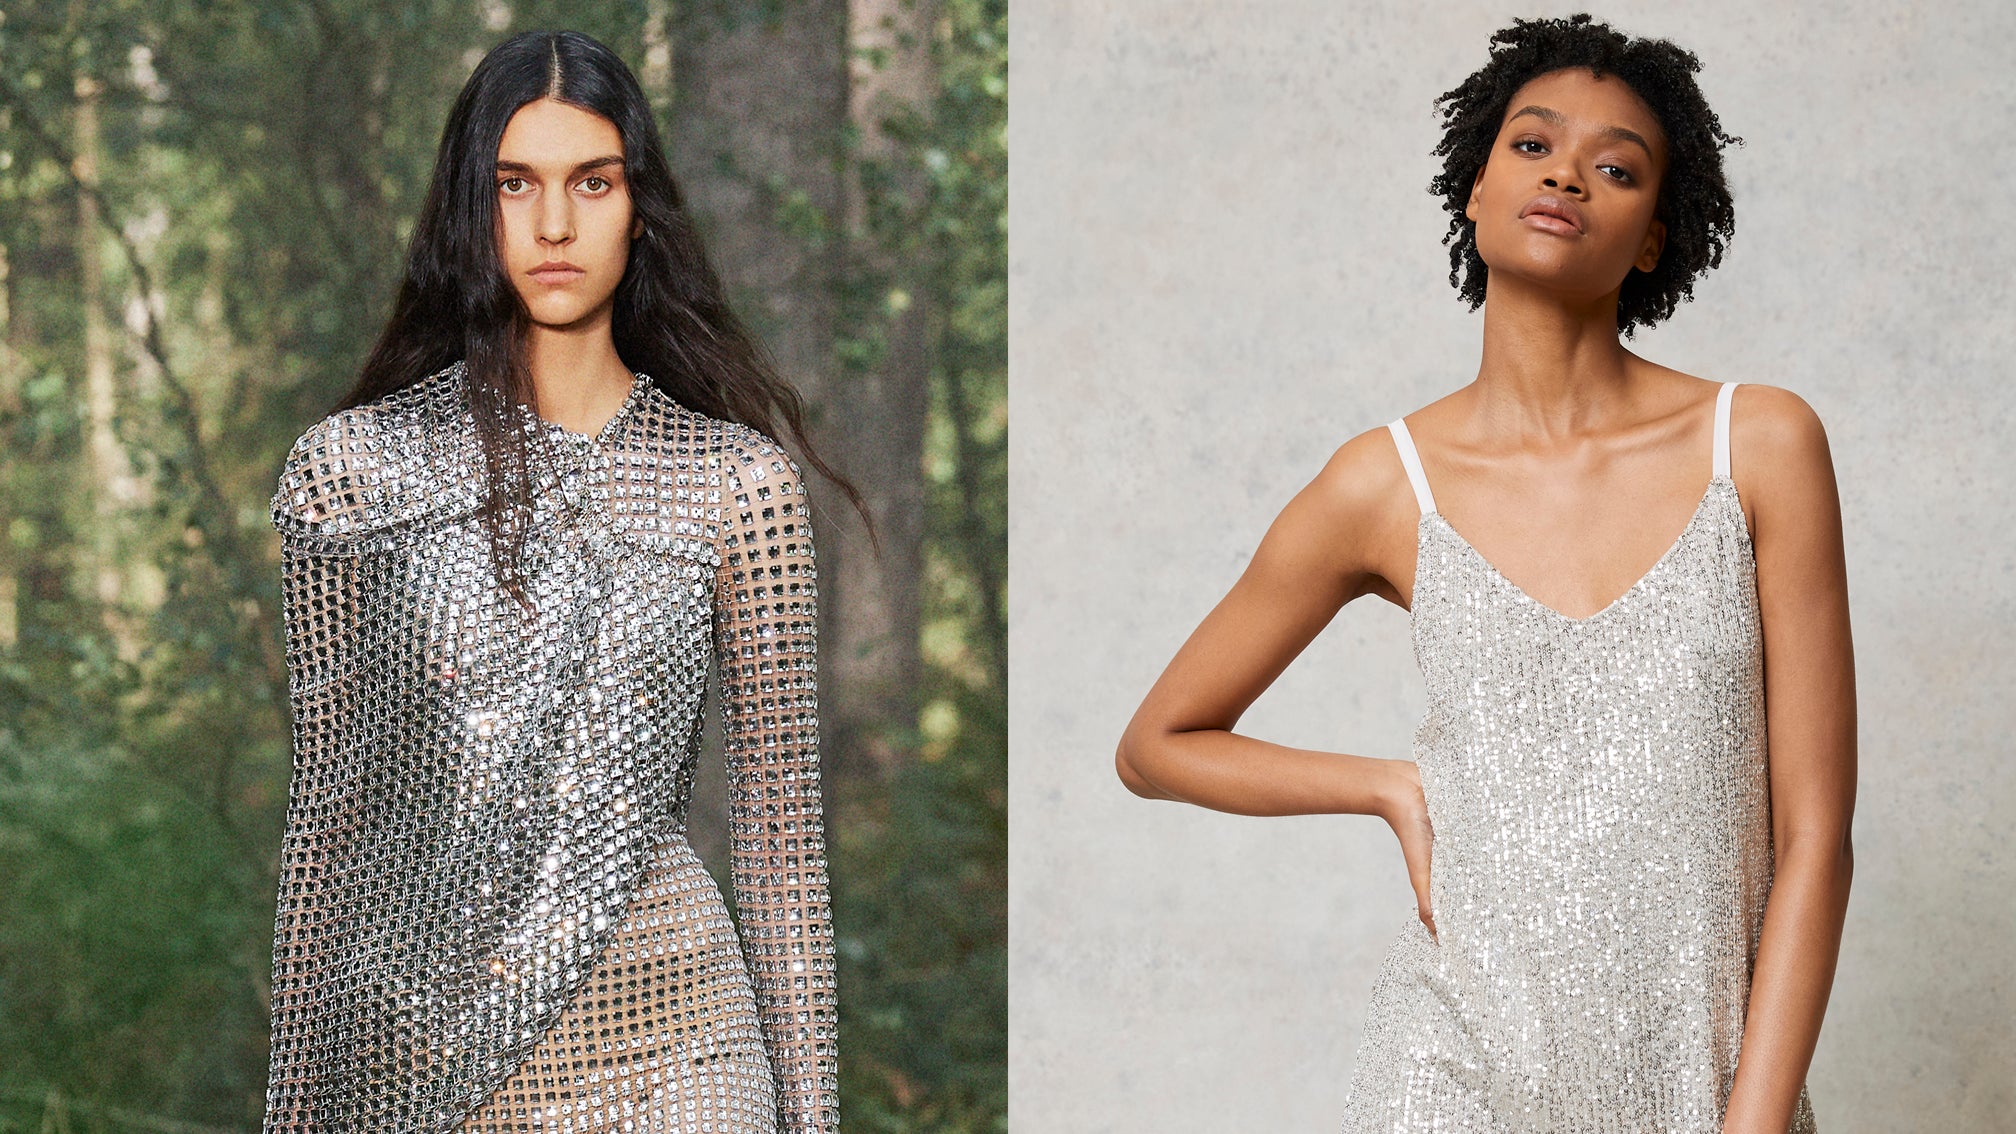 Sequins and glitter were awash on the SS21 catwalks (Burberry/Mint Velvet/PA)